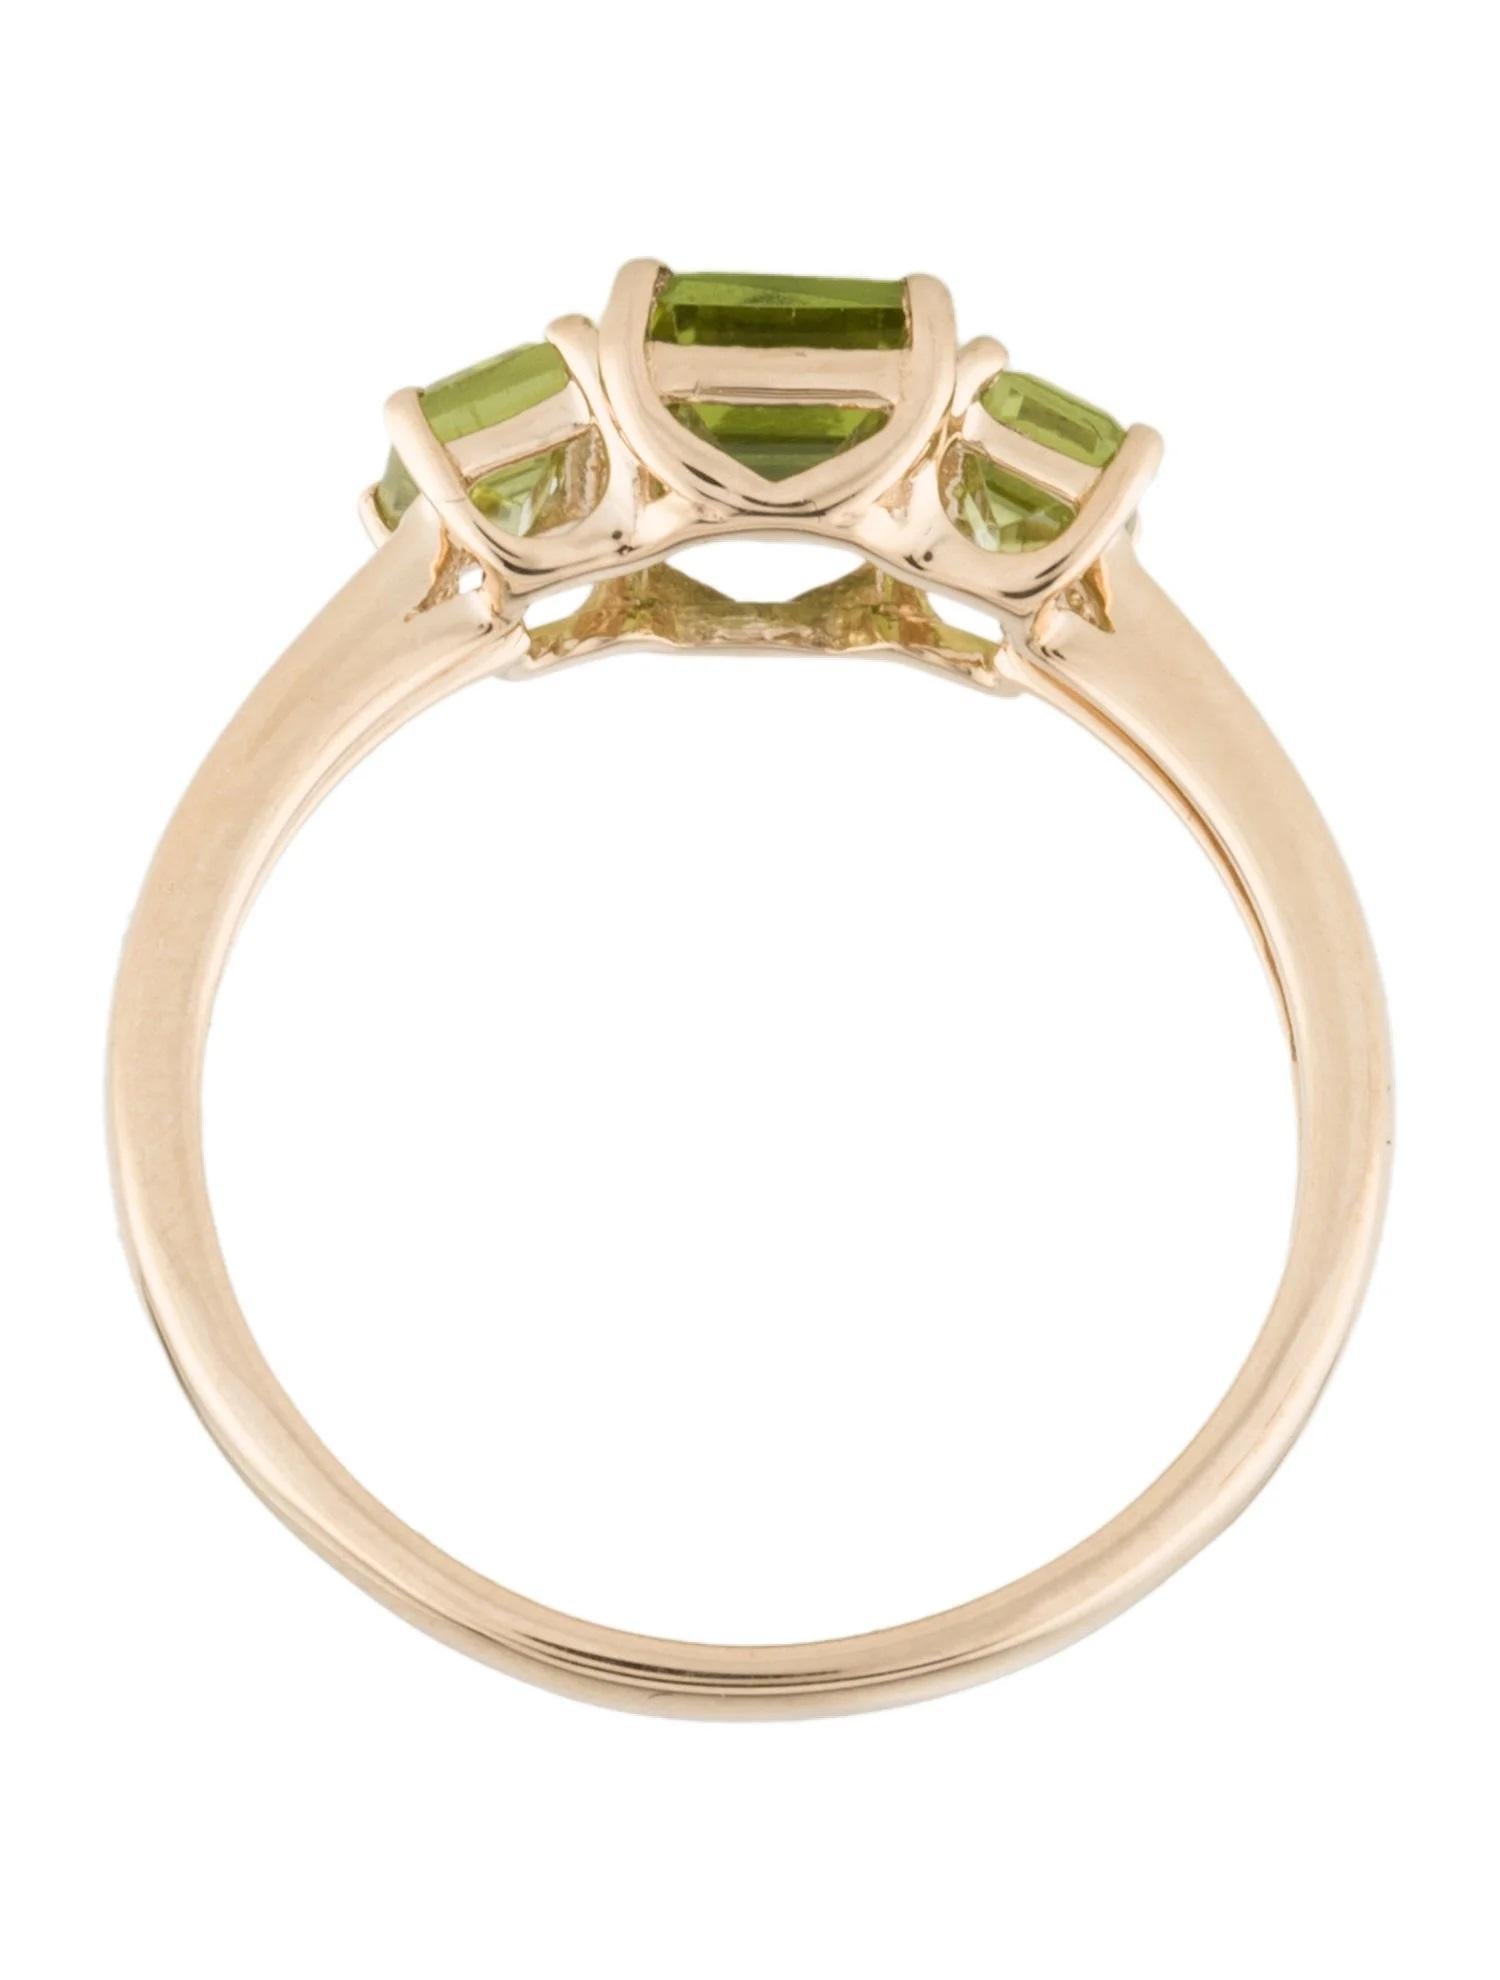 14K Peridot Cocktail Ring  1.76ctw Cut Cornered Rectangular Step Cut  Yellow G In New Condition For Sale In Holtsville, NY